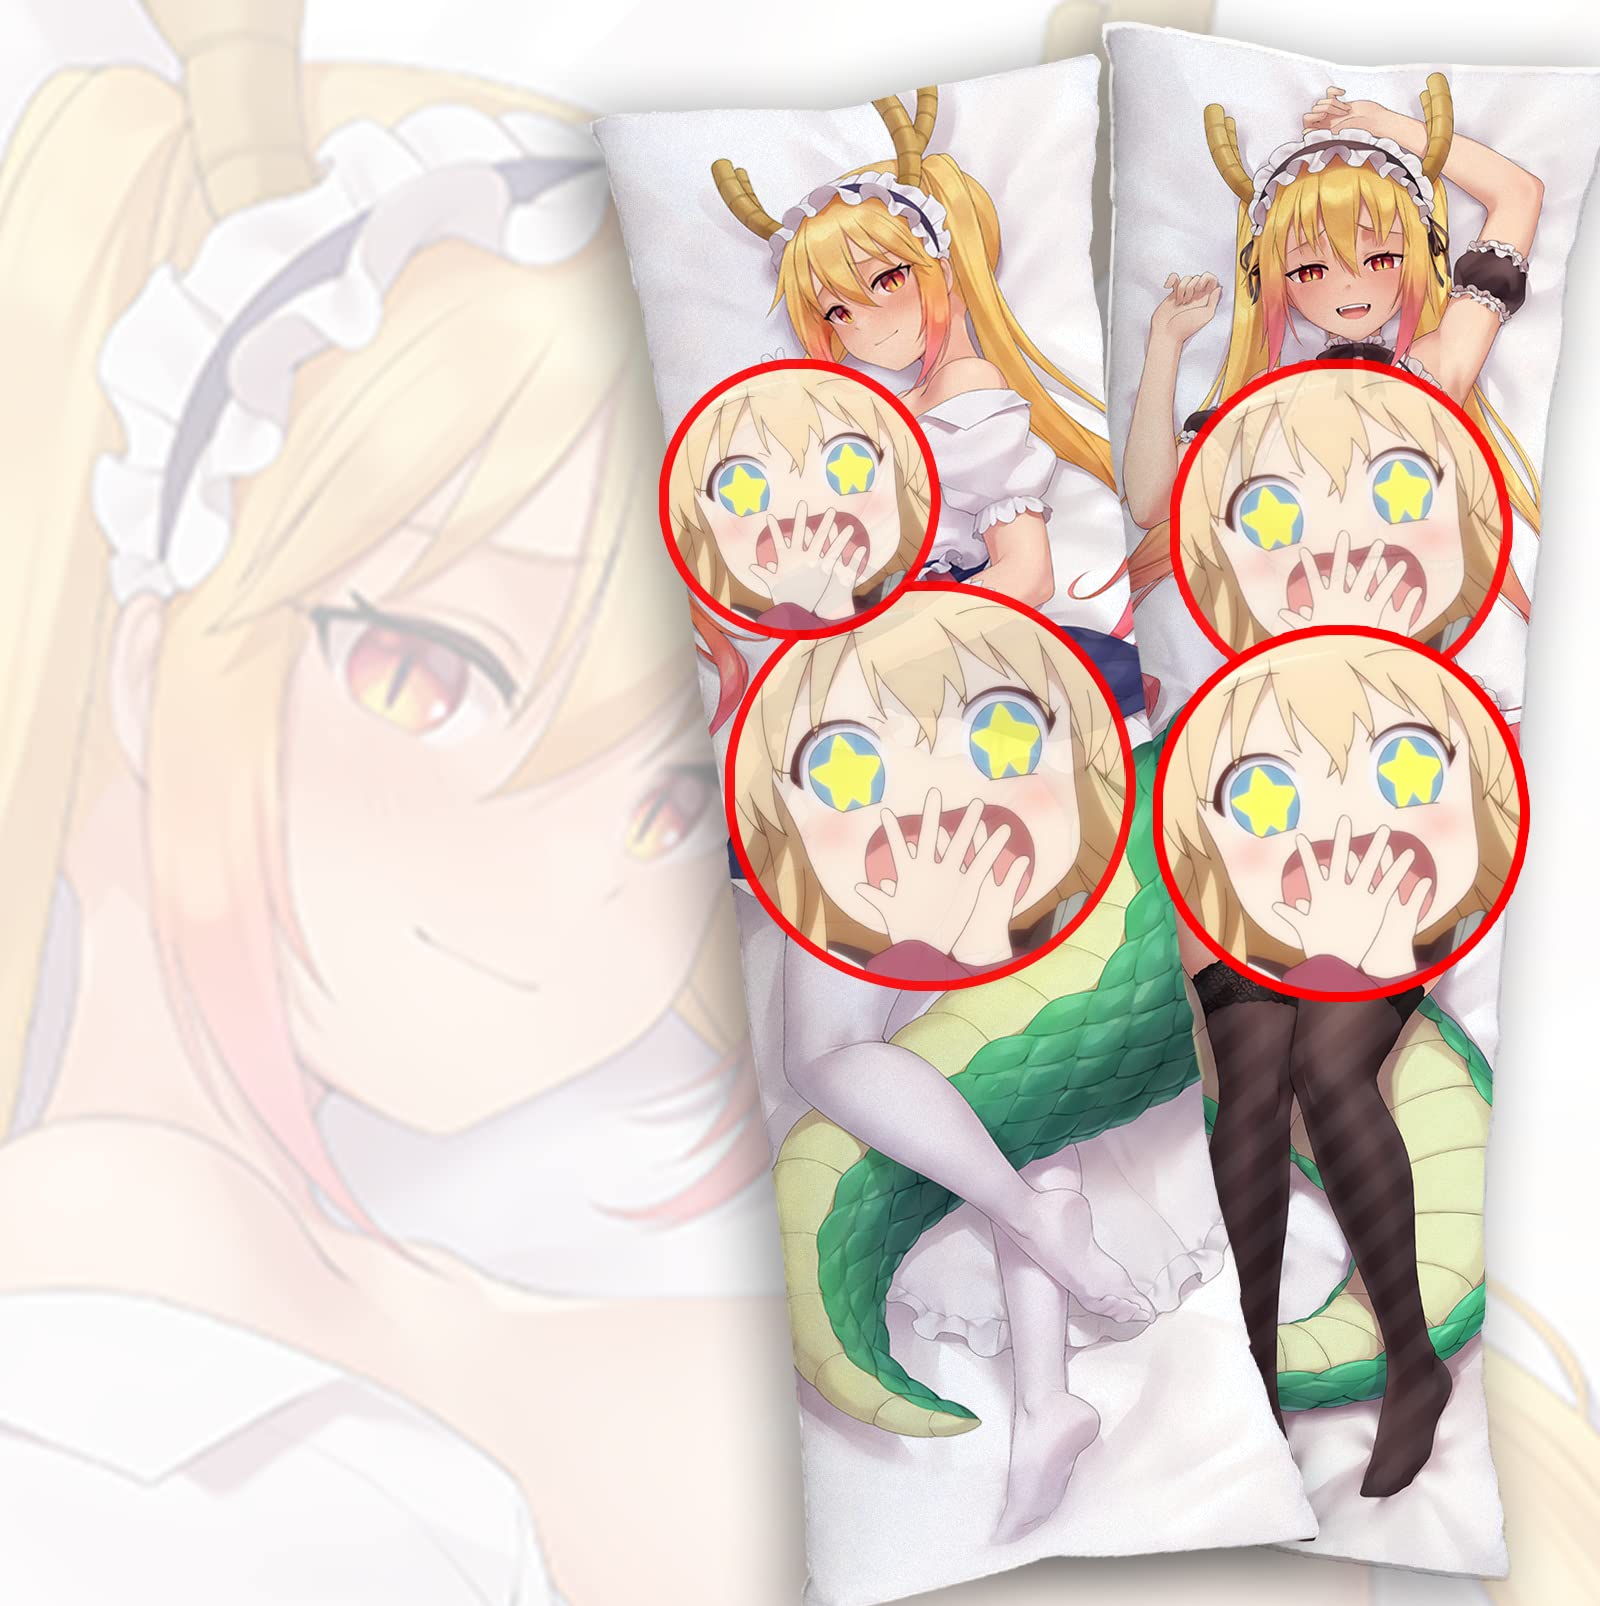 merchandise - Who was the first anime character to be on a body pillow? -  Anime & Manga Stack Exchange